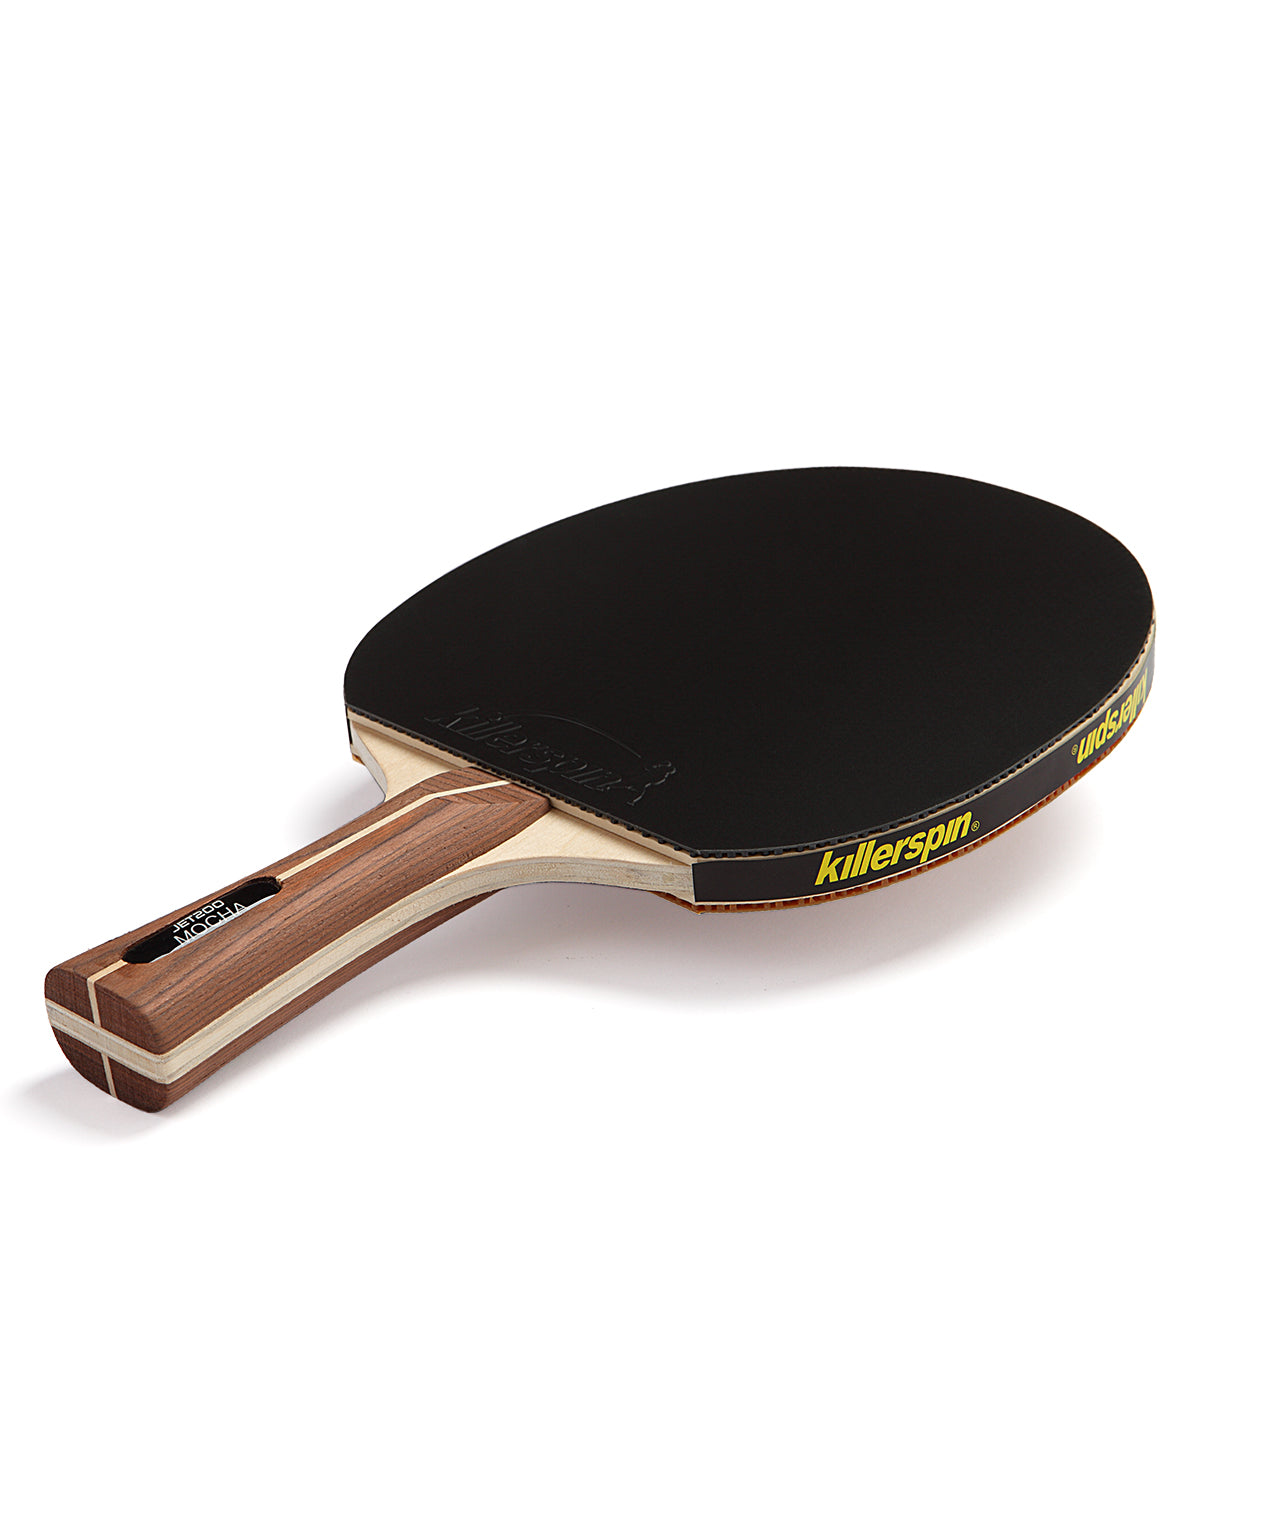 The 8 Best Ping Pong Paddles of 2023